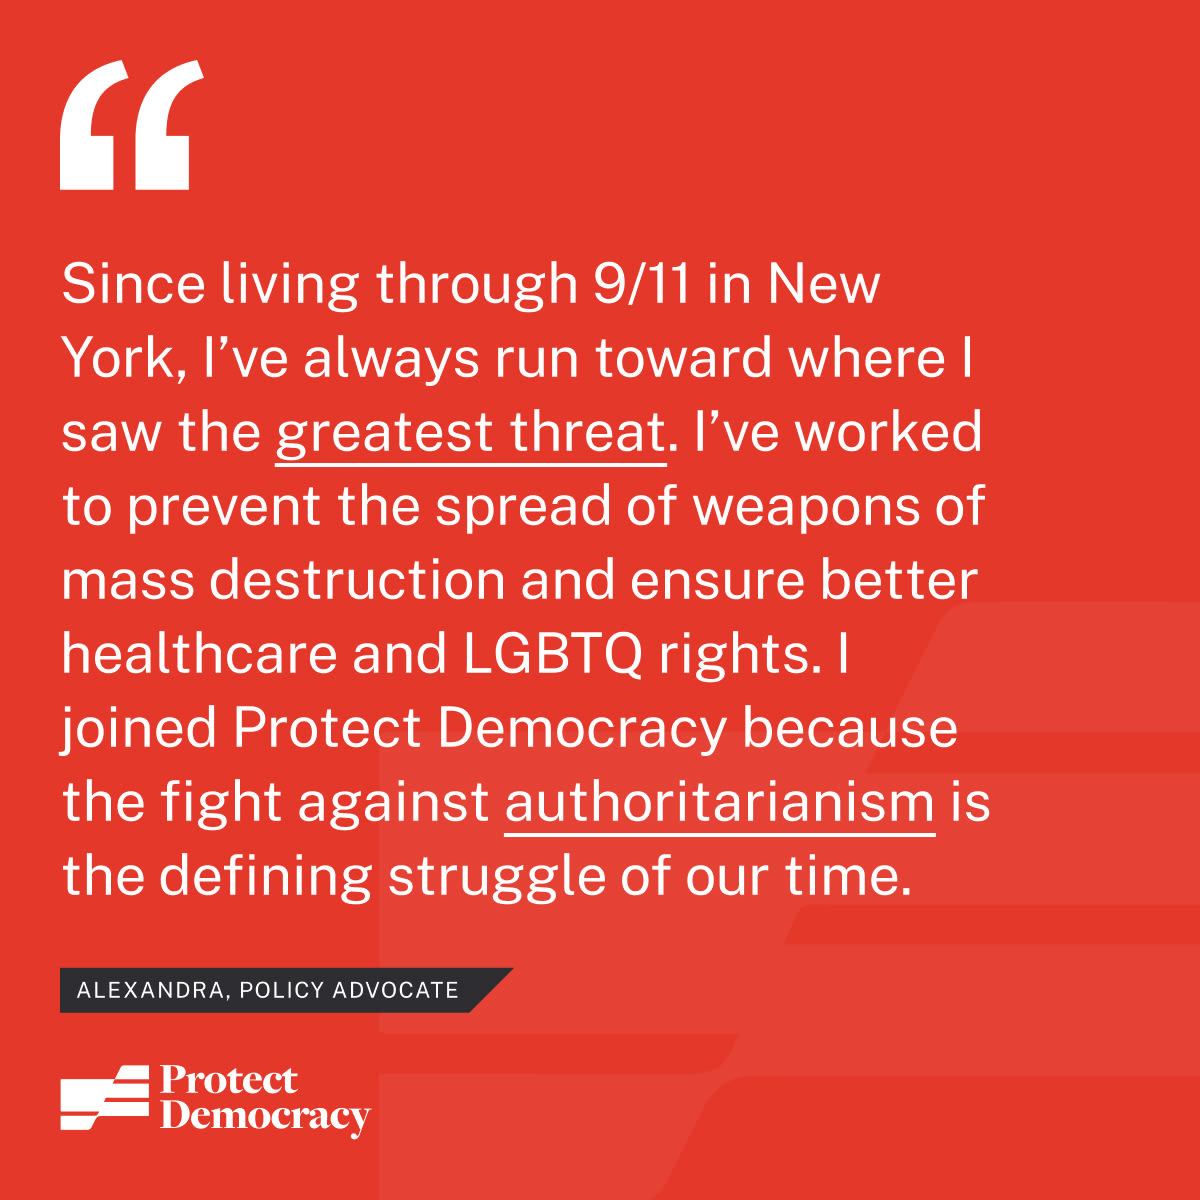 “Since living through 9/11 in New York City, I’ve always run toward where I saw the greatest threat. I’ve worked to prevent the spread of weapons of mass destruction, I’ve fought for better healthcare and LGBTQ rights, and I’ve run for office. I joined Protect Democracy because the fight against authoritarianism is the defining struggle of our time.” – Alexandra, Policy Advocate